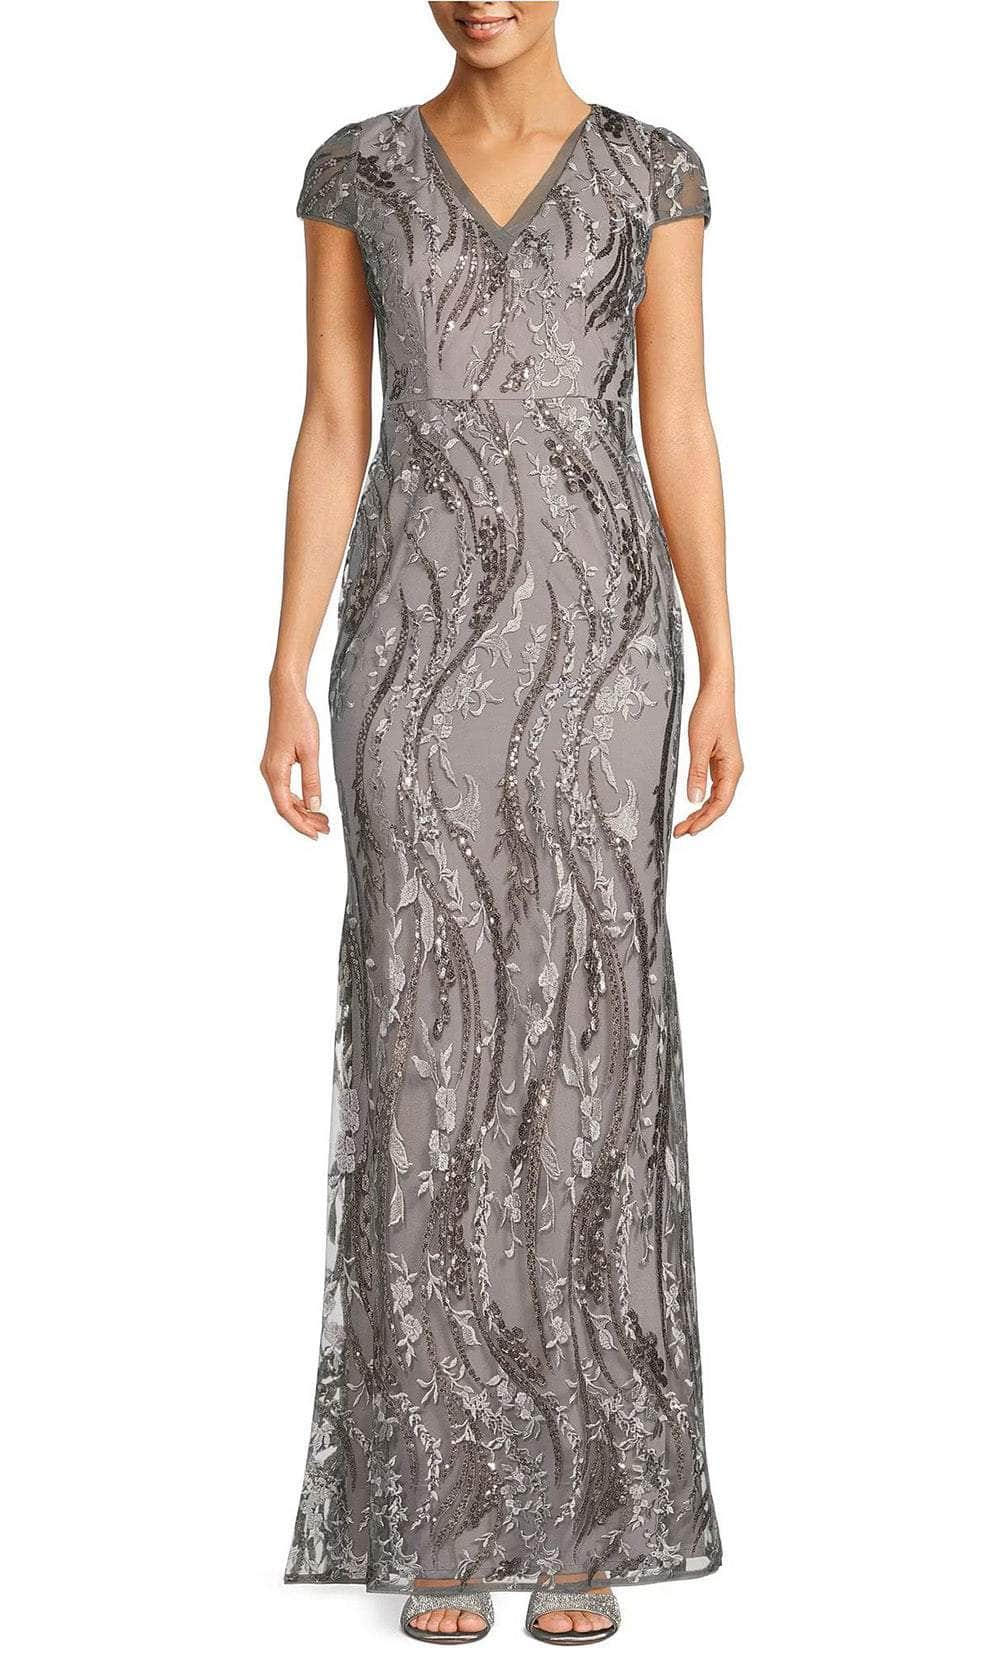 Adrianna Papell AP1E210106 - V Neck Sequin Embroidery Gown
